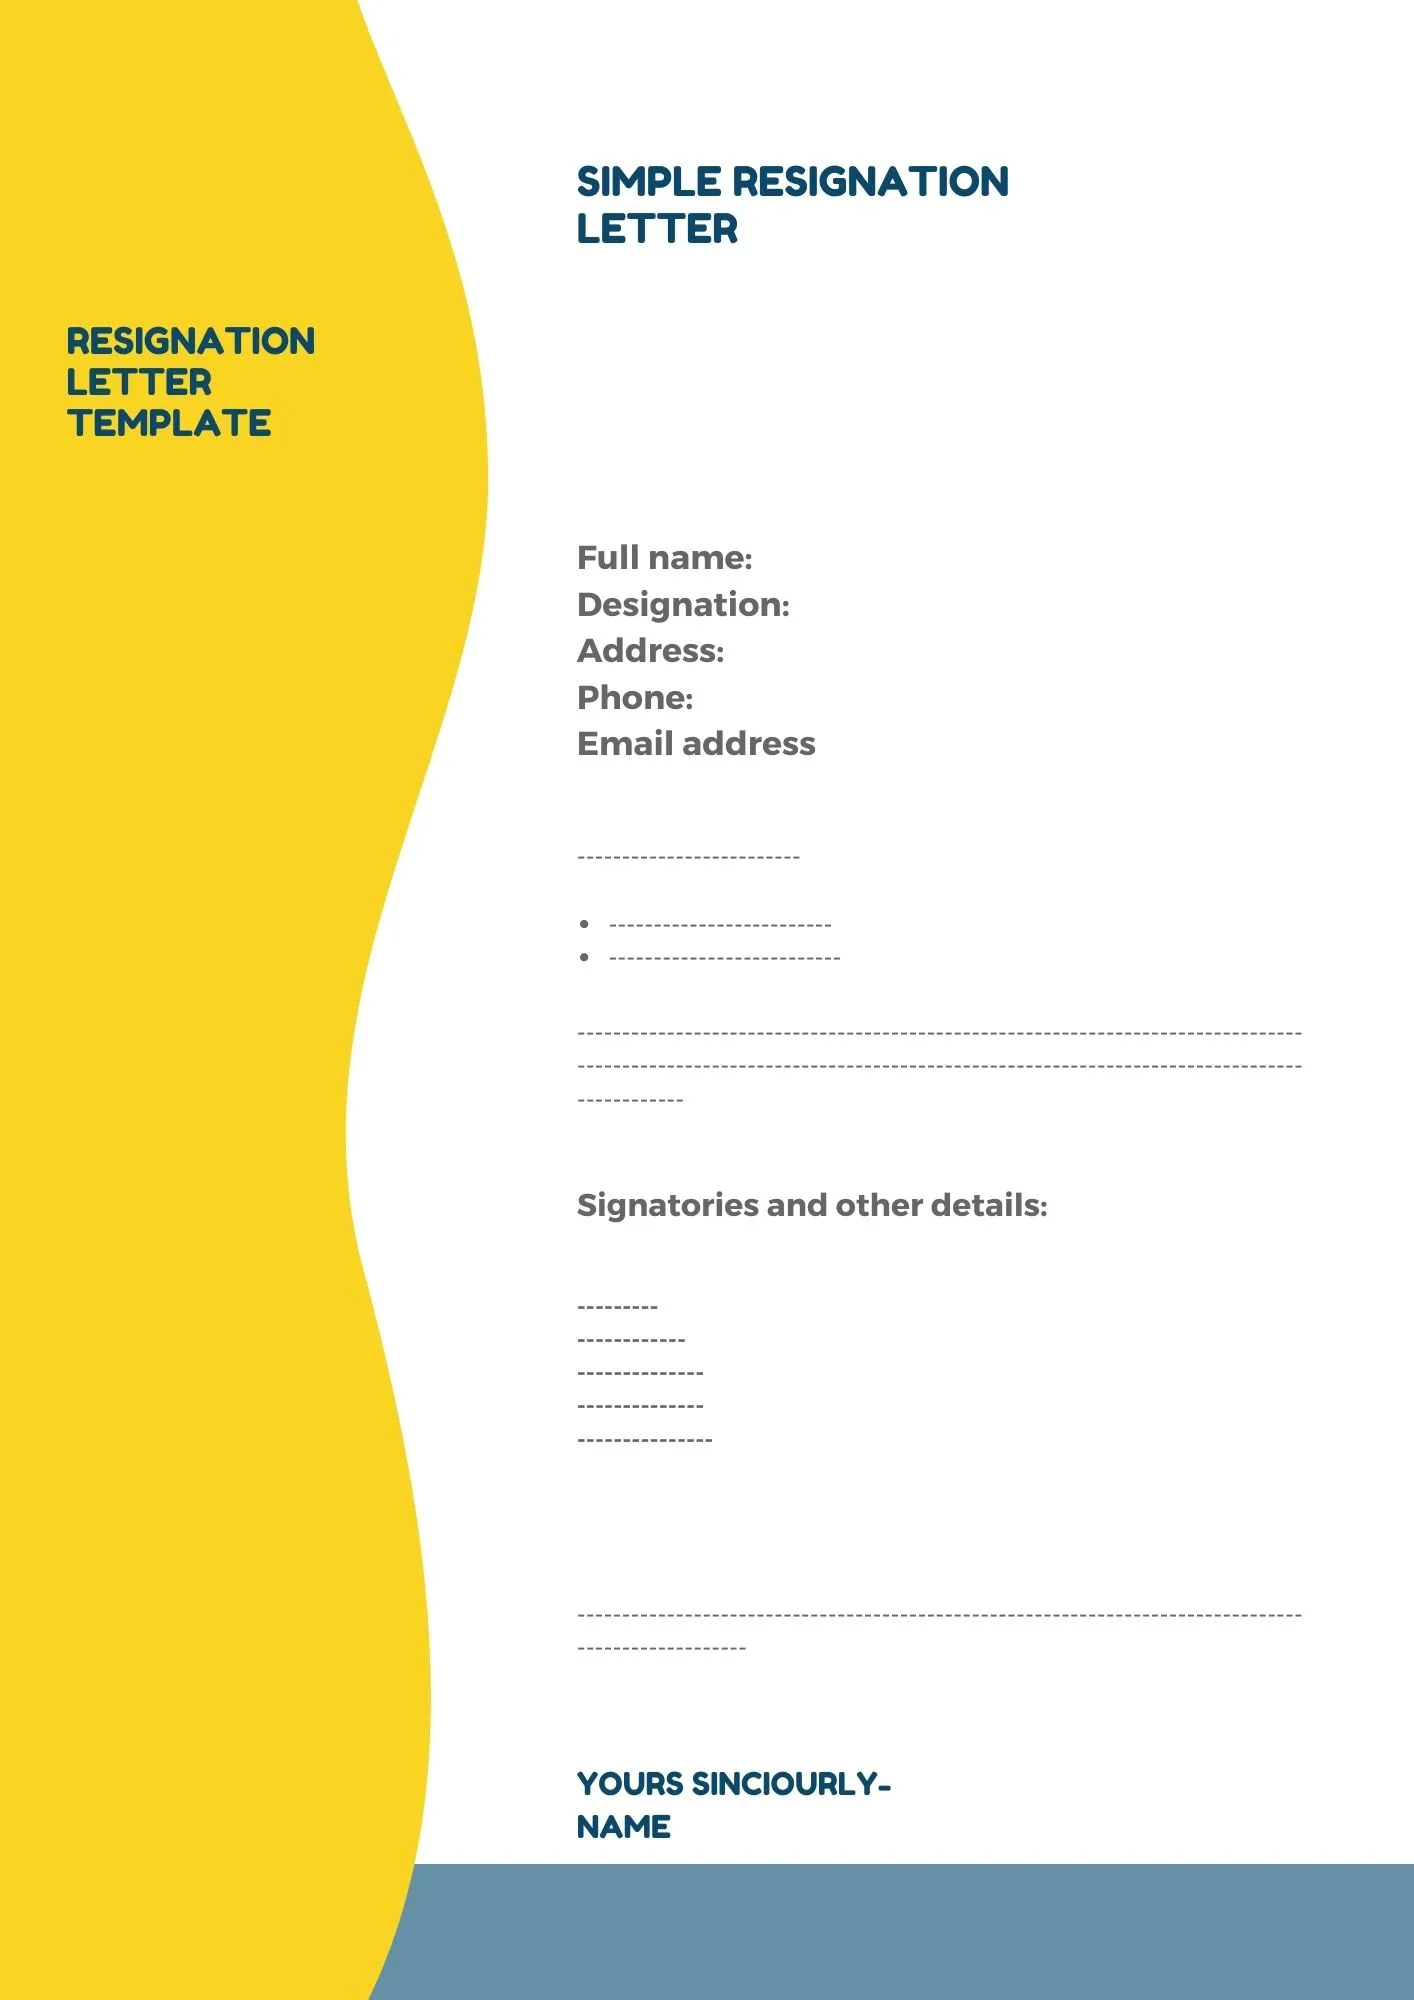 Download the Resignation Letter Sample Template in PDF